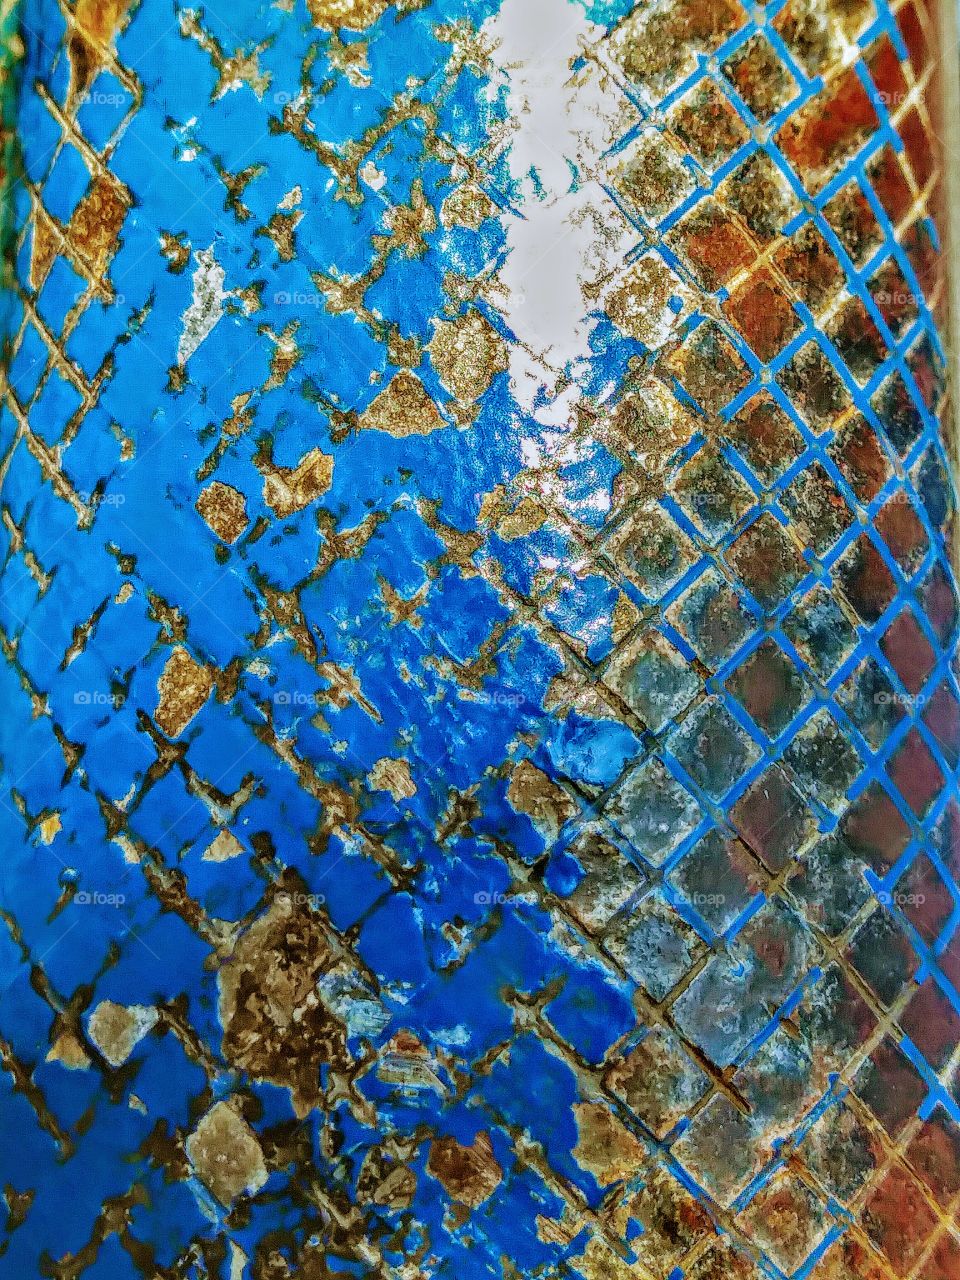 textured metal pole blue paint chipping and metal rusting